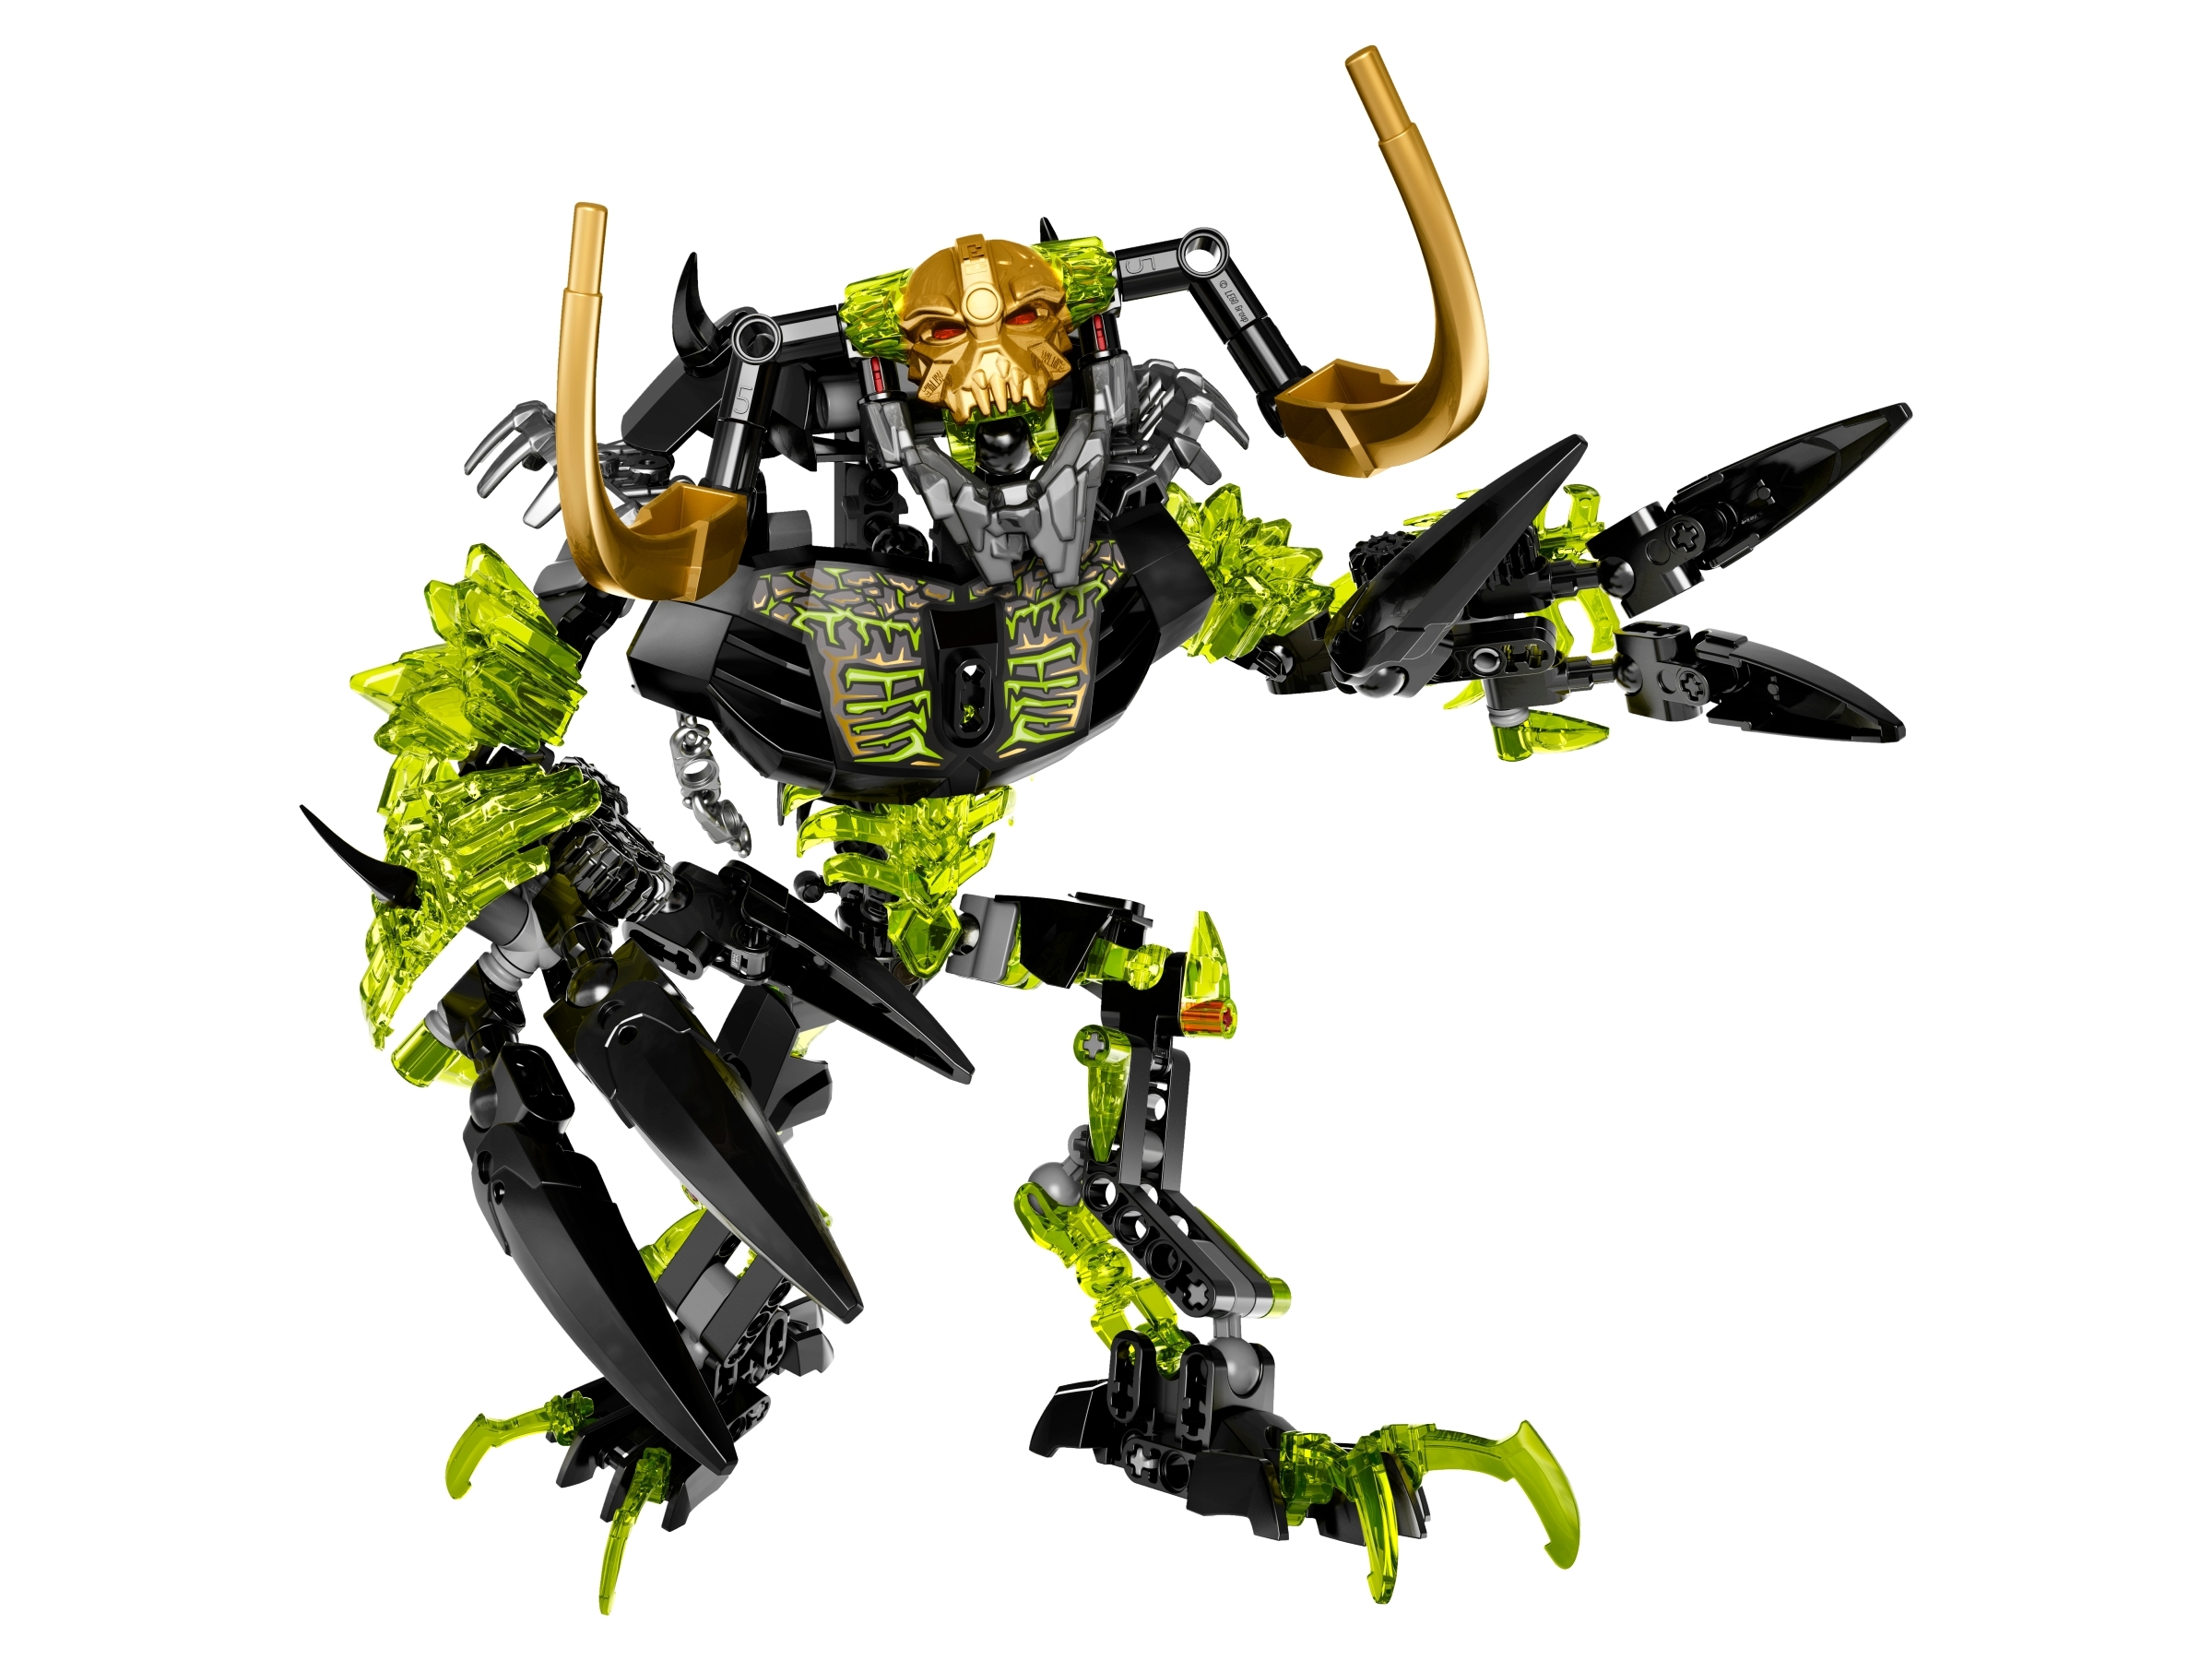 building instructions for lego bionicle umark